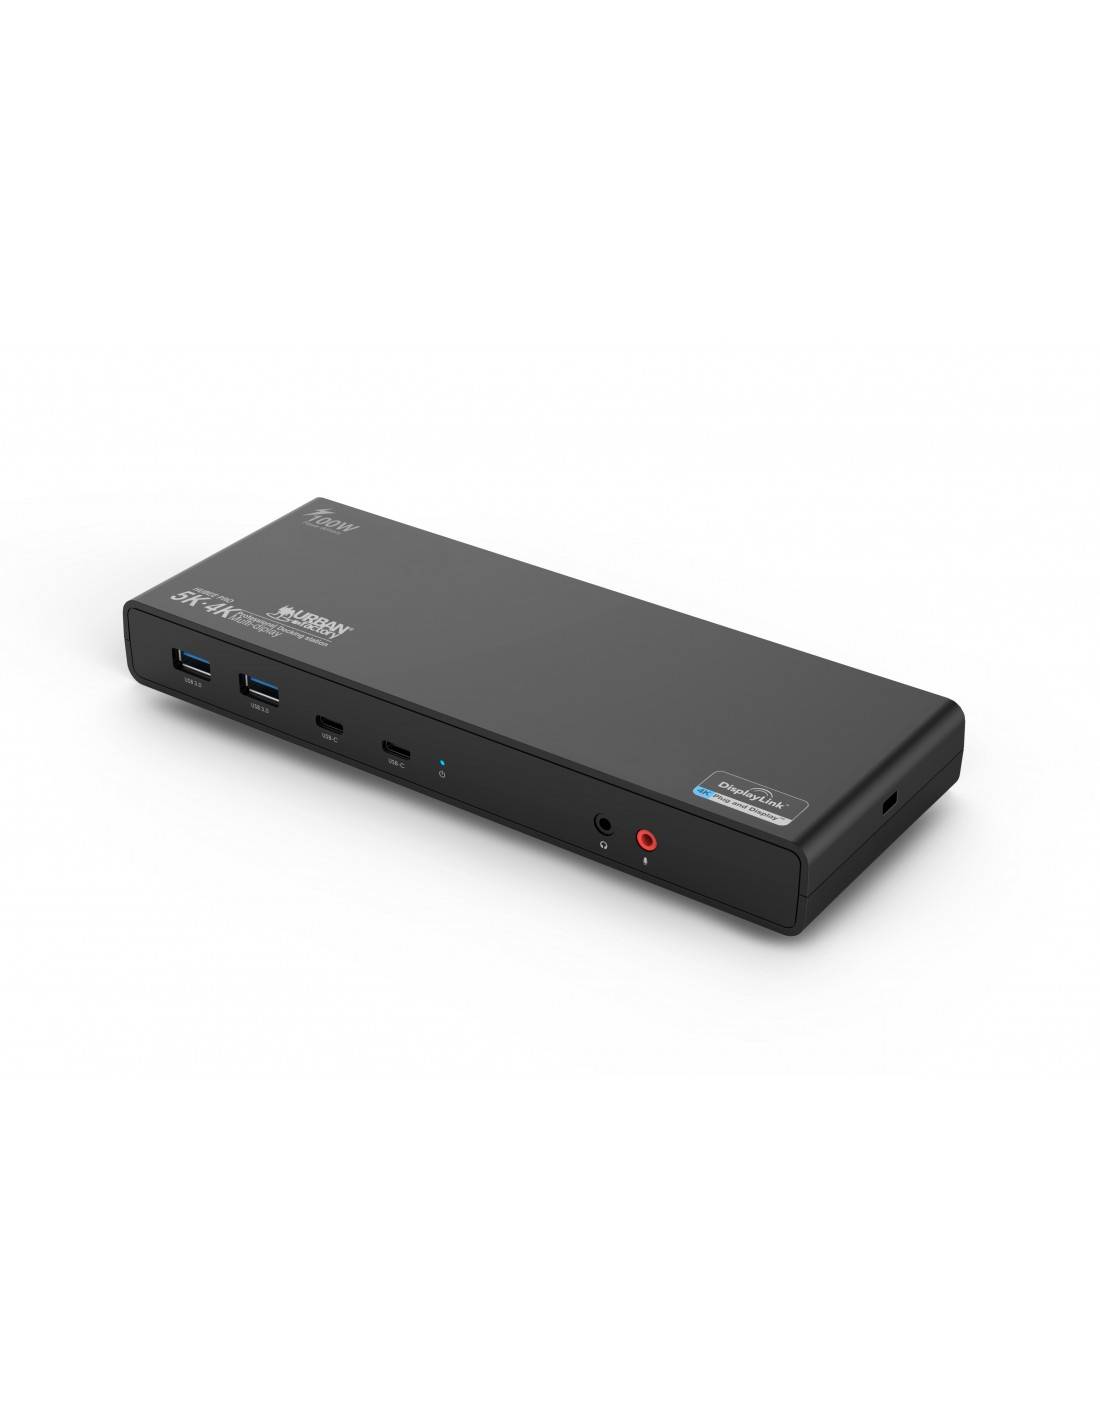 Rca Informatique - image du produit : HUBEE PRO DOCKING STATION WITH AN EXTERNAL POWER SUPPLY OF 130W